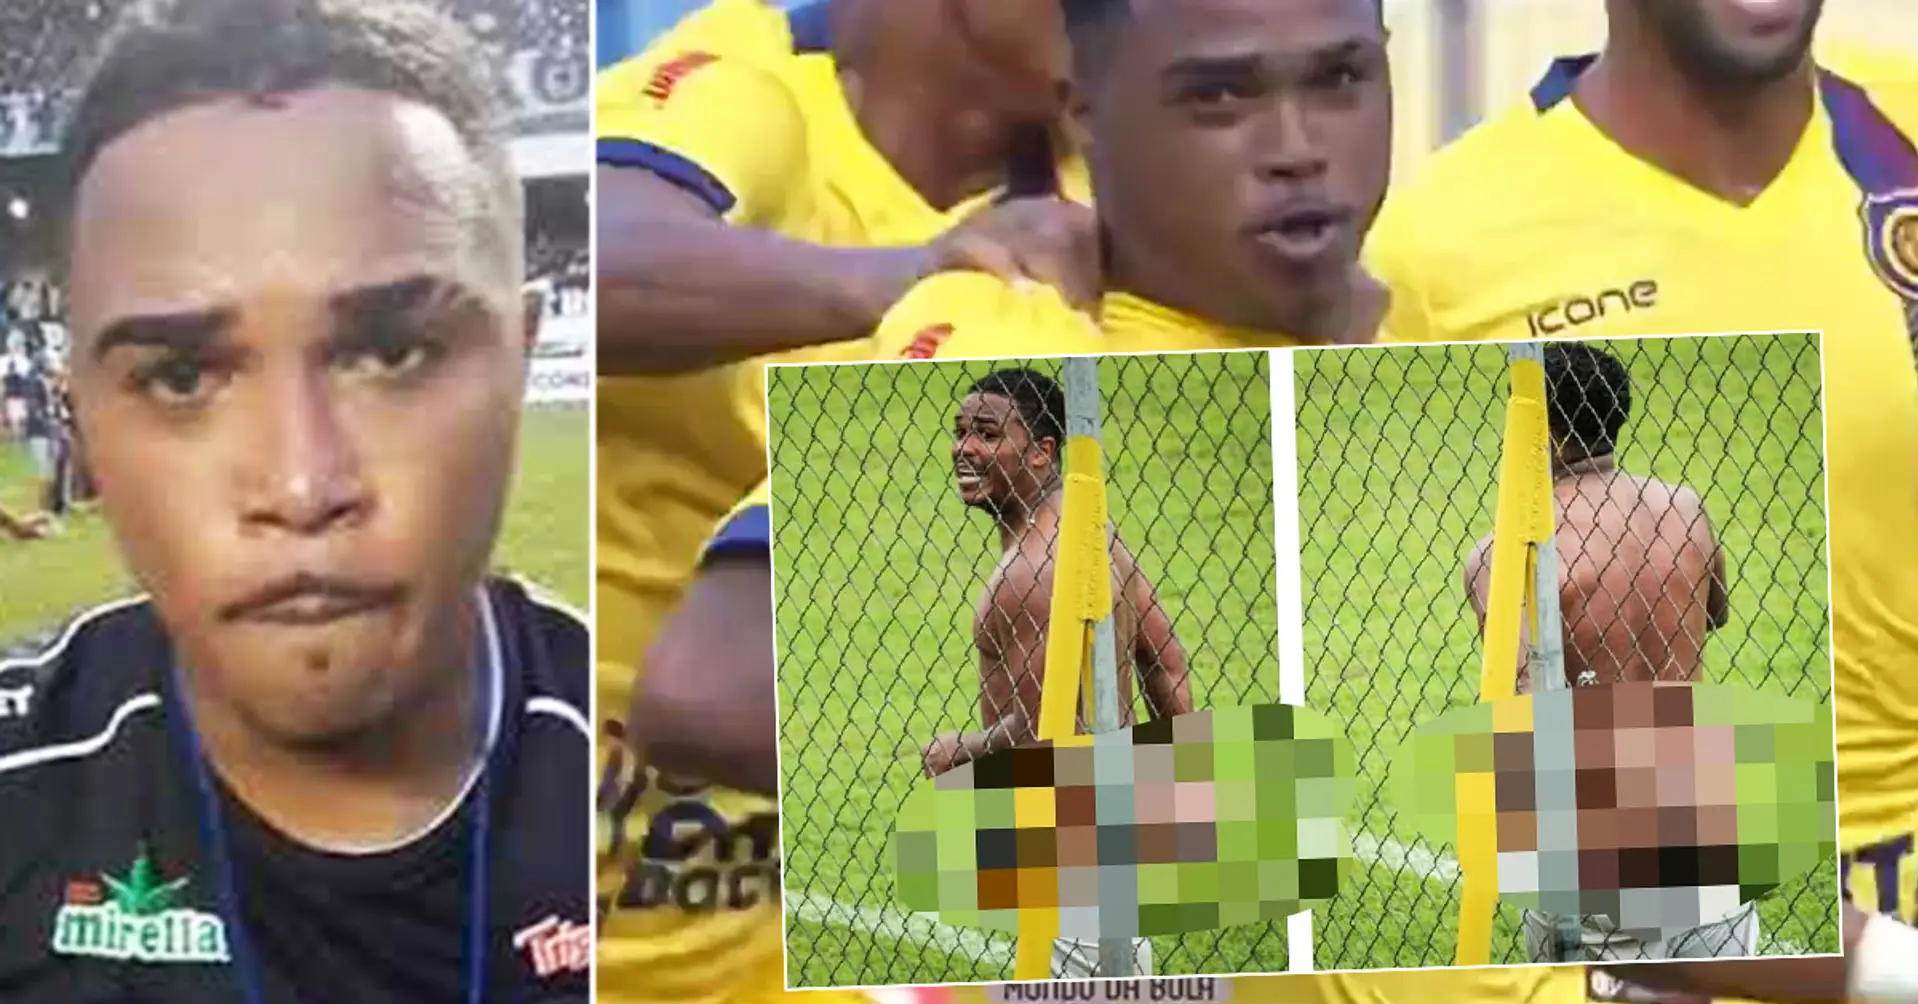 Brazilian player waves genitals at opponents, stuns fans with butt-naked celebration and gets eight-match ban